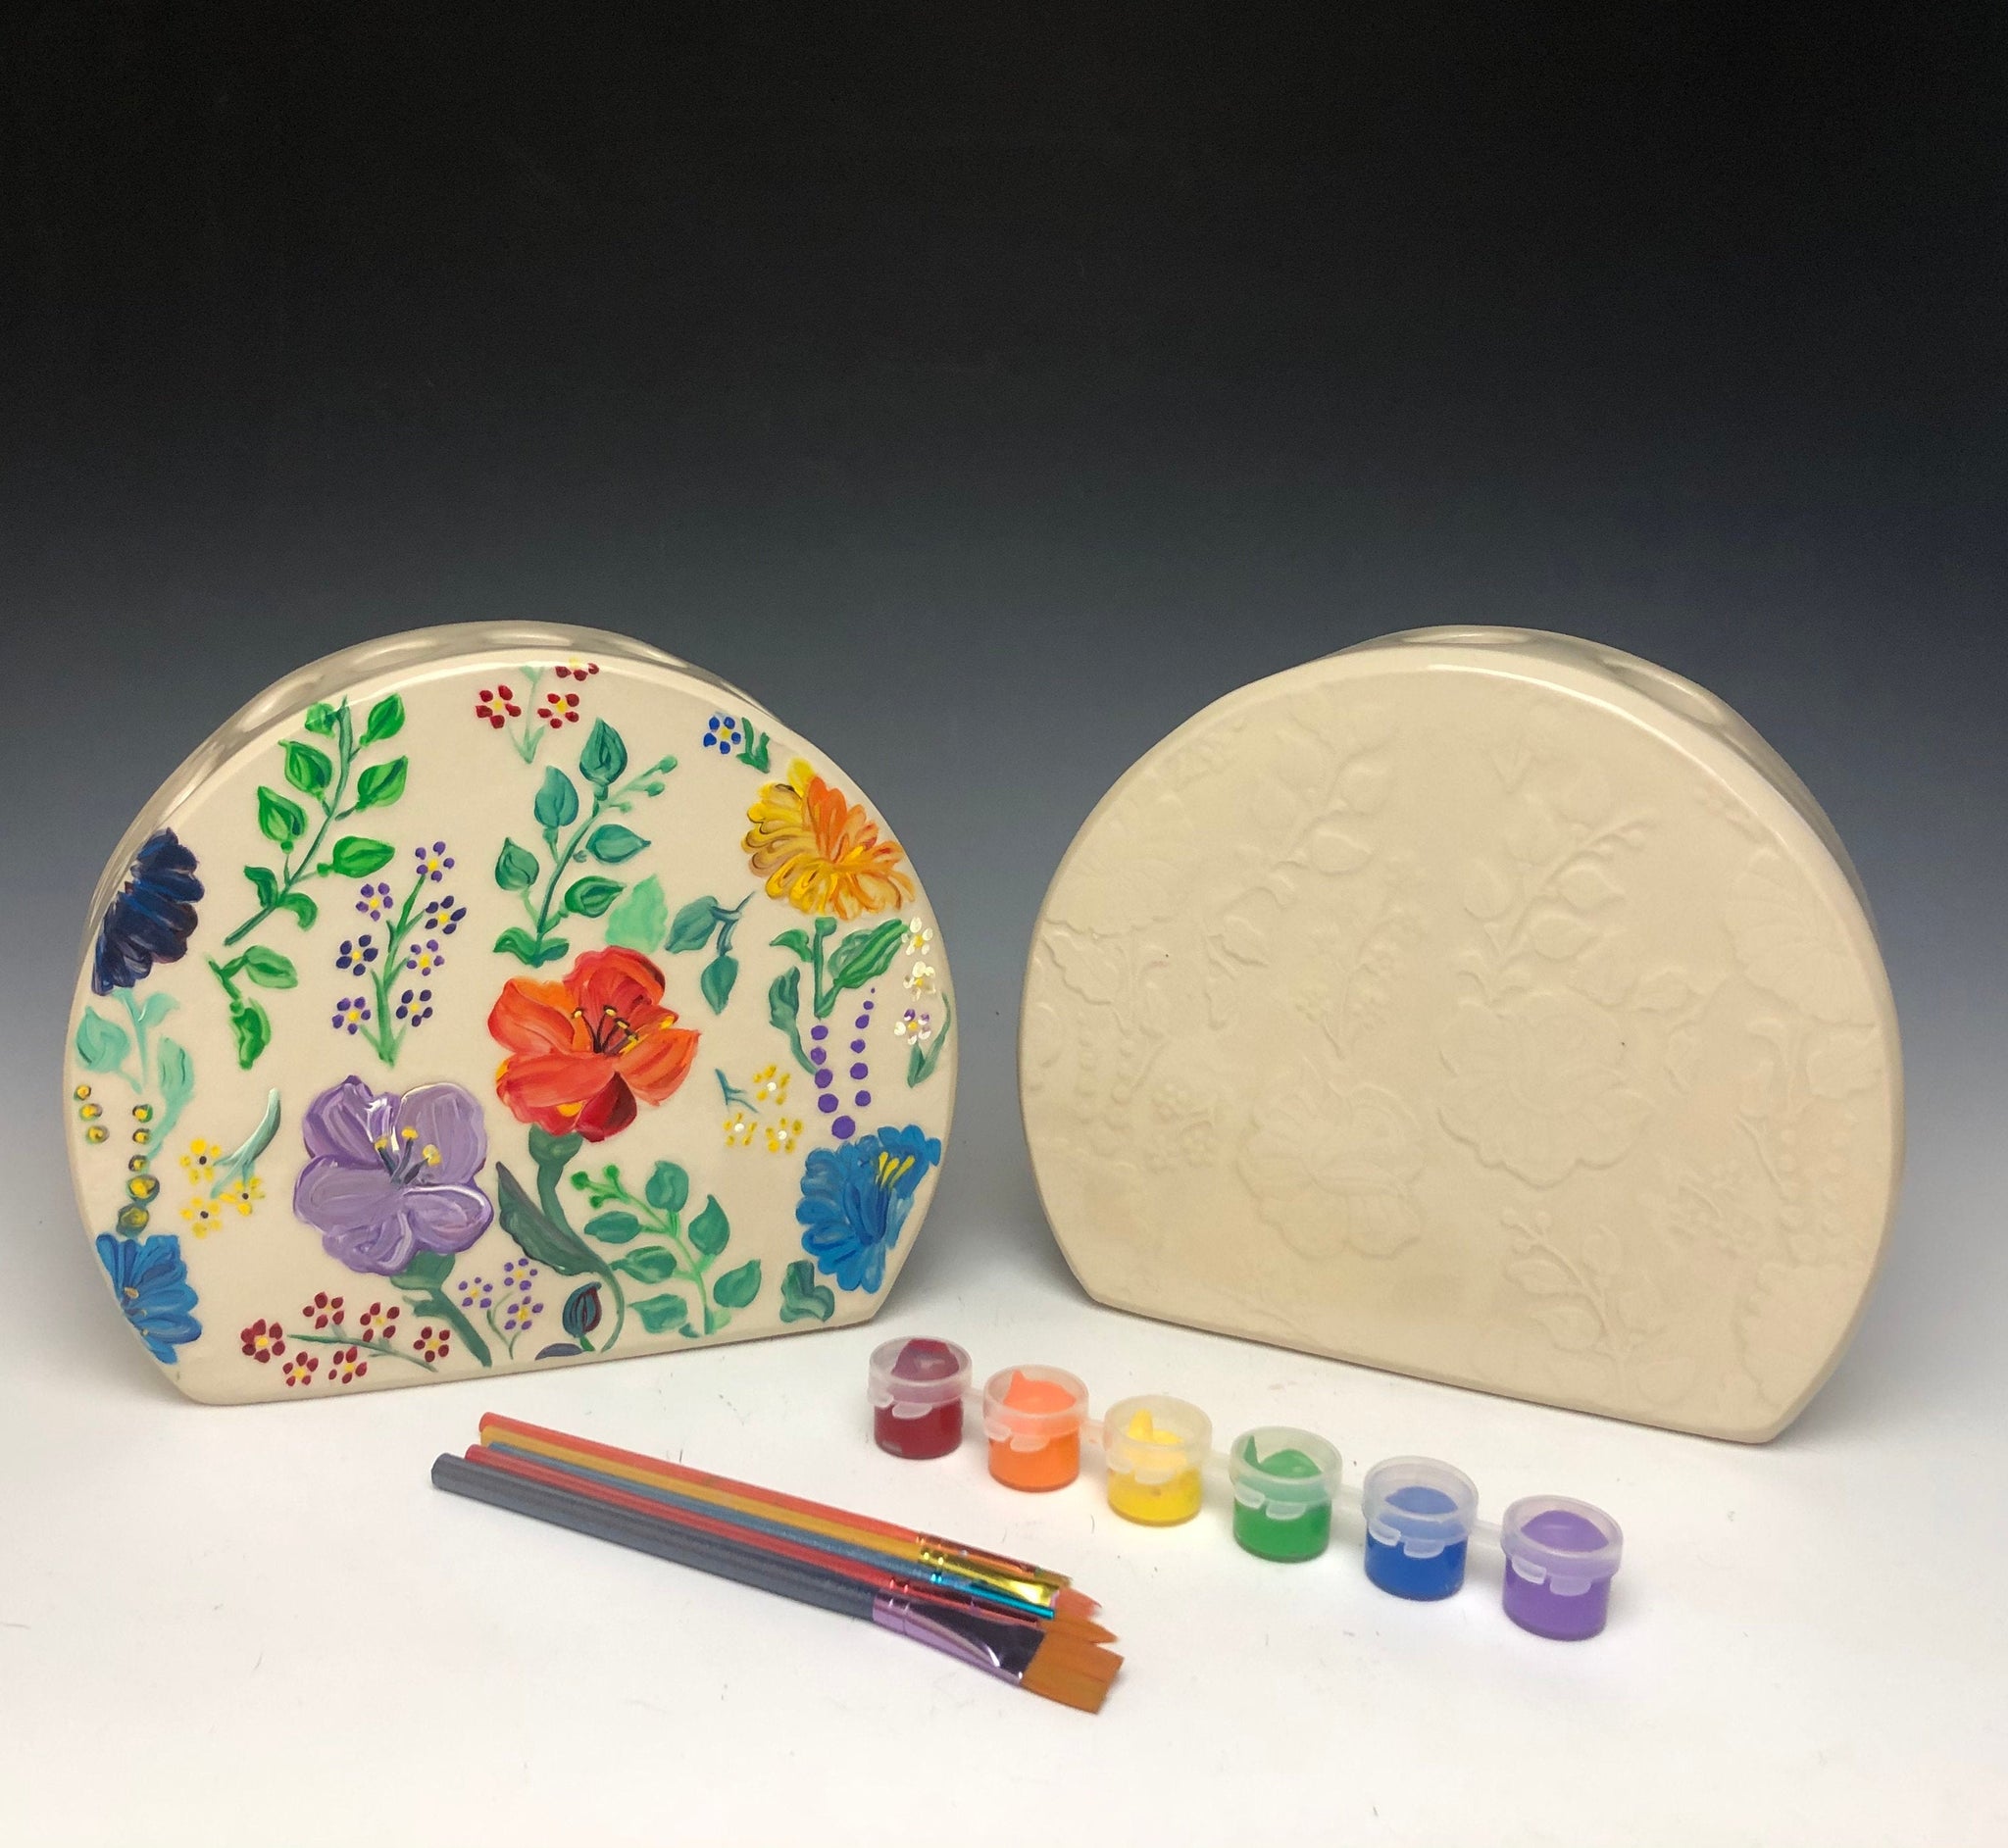 Paint Your Own Vase Kit - Floral Print – Lindsey Epstein Pottery